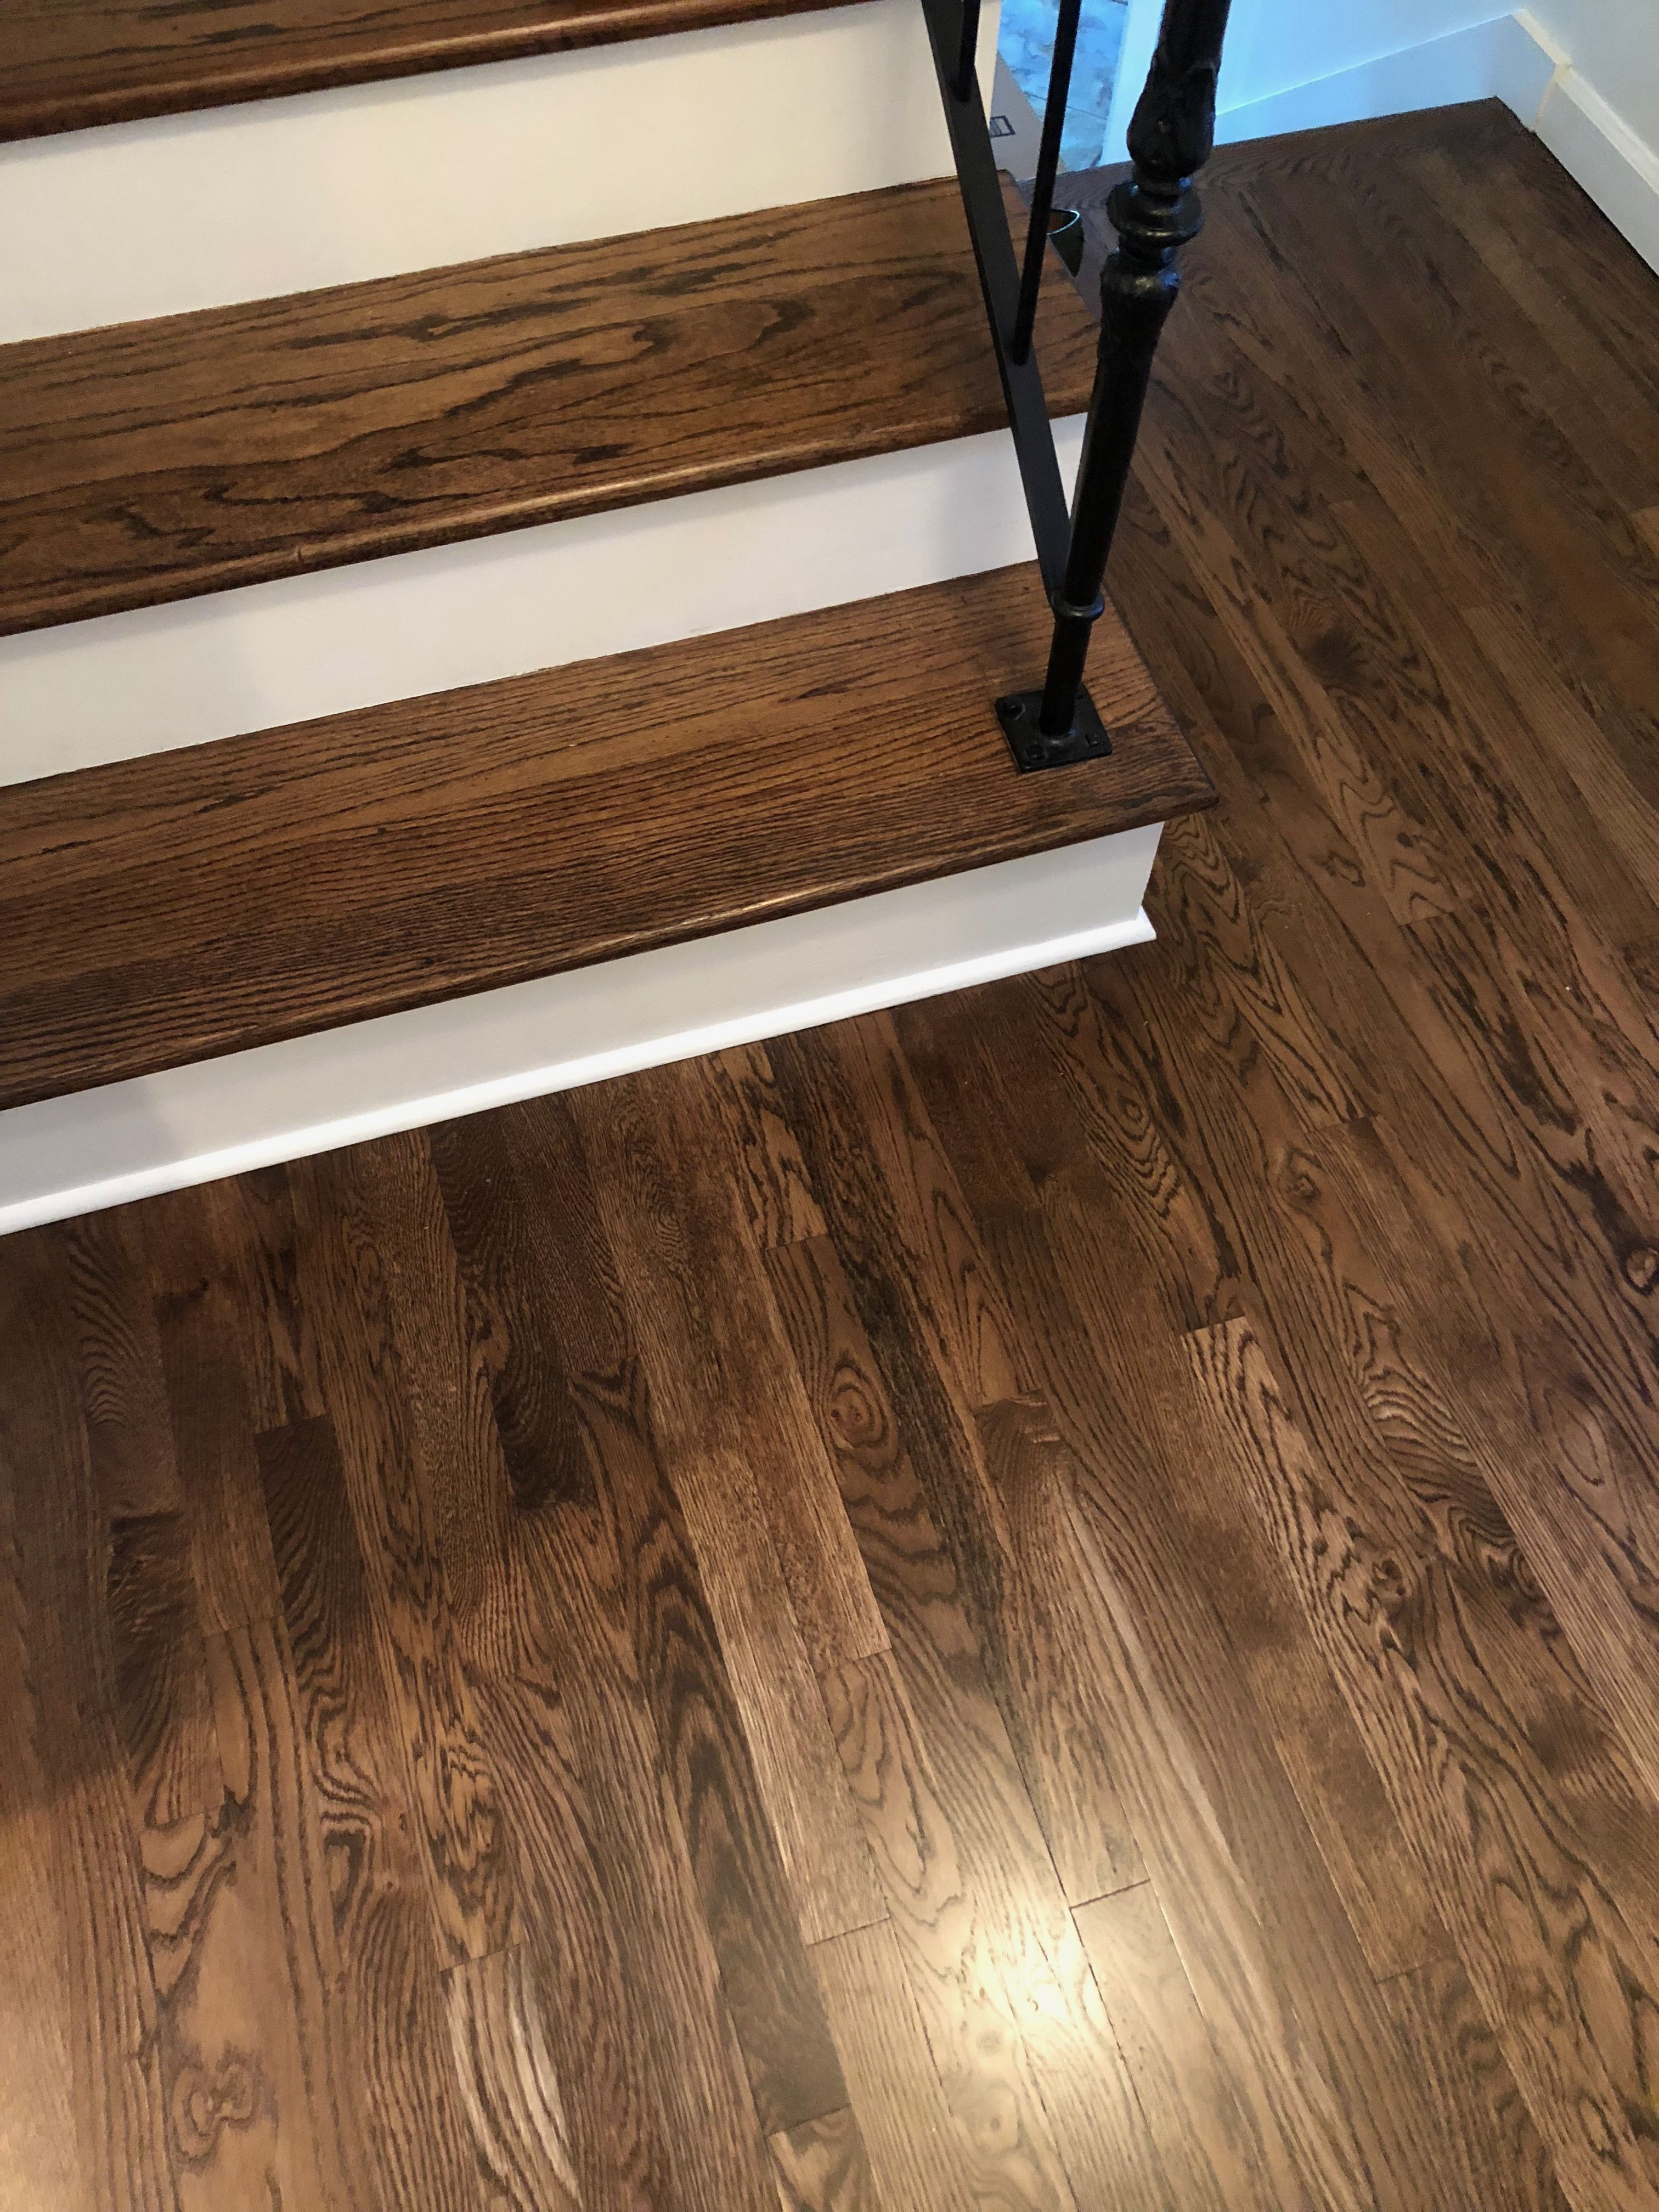 Cheap Red Oak Hardwood Flooring Of Duraseal Dark Walnut with Satin Finish Floors are Select White Oak within Duraseal Dark Walnut with Satin Finish Floors are Select White Oak and Stair Tread is